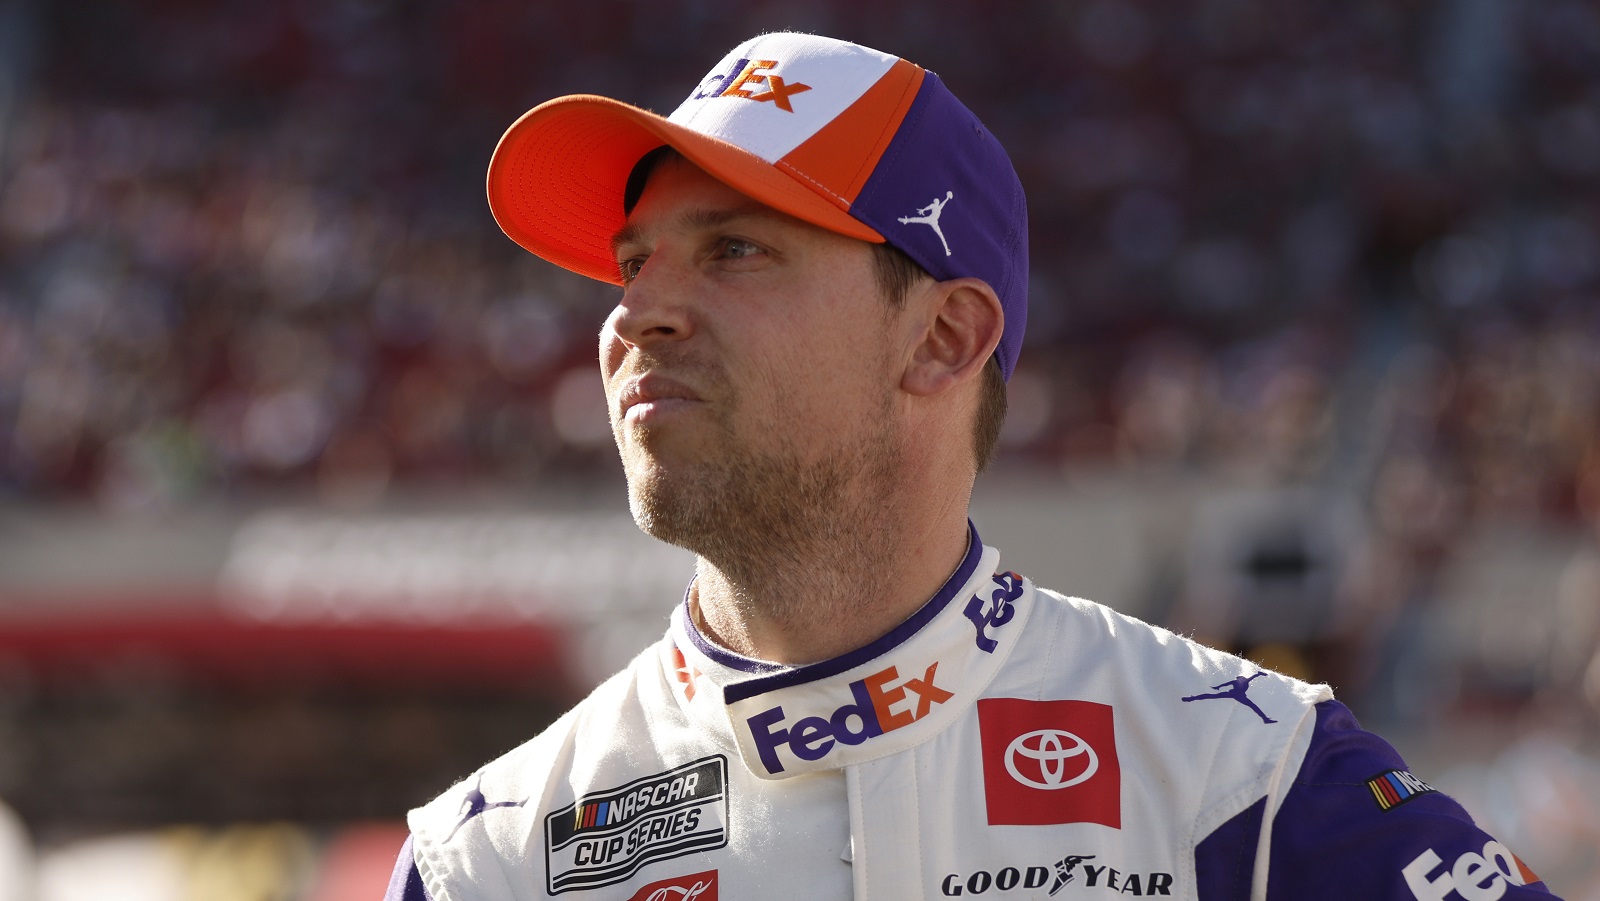 Denny Hamlin is seen on the grid prior to the NASCAR Cup Series Busch Light Clash at the Los Angeles Memorial Coliseum on Feb. 6, 2022.